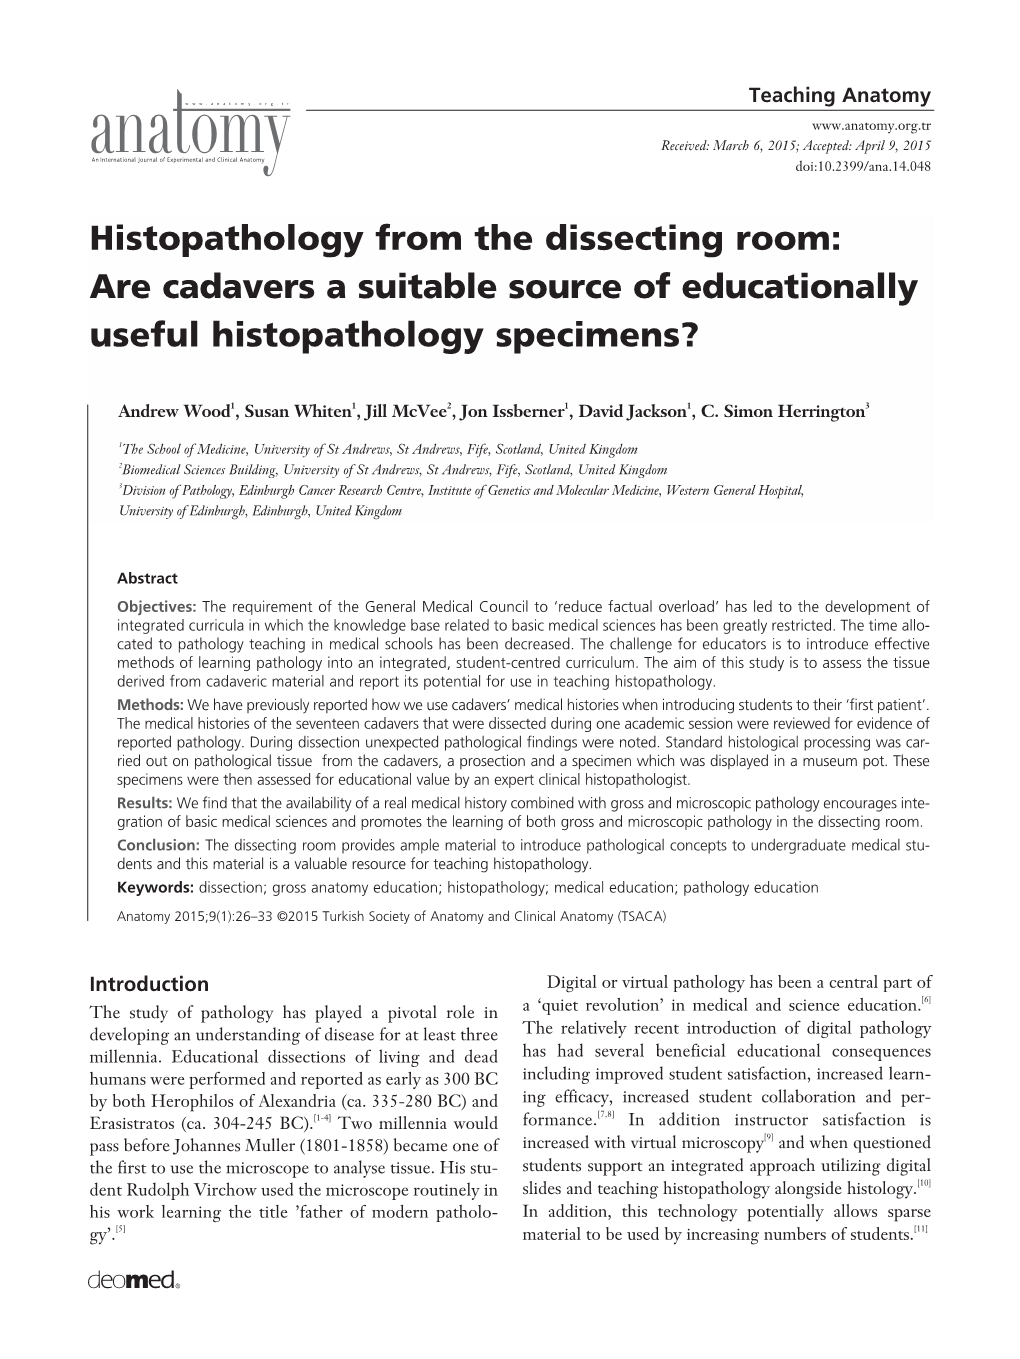 Histopathology from the Dissecting Room: Are Cadavers a Suitable Source of Educationally Useful Histopathology Specimens?